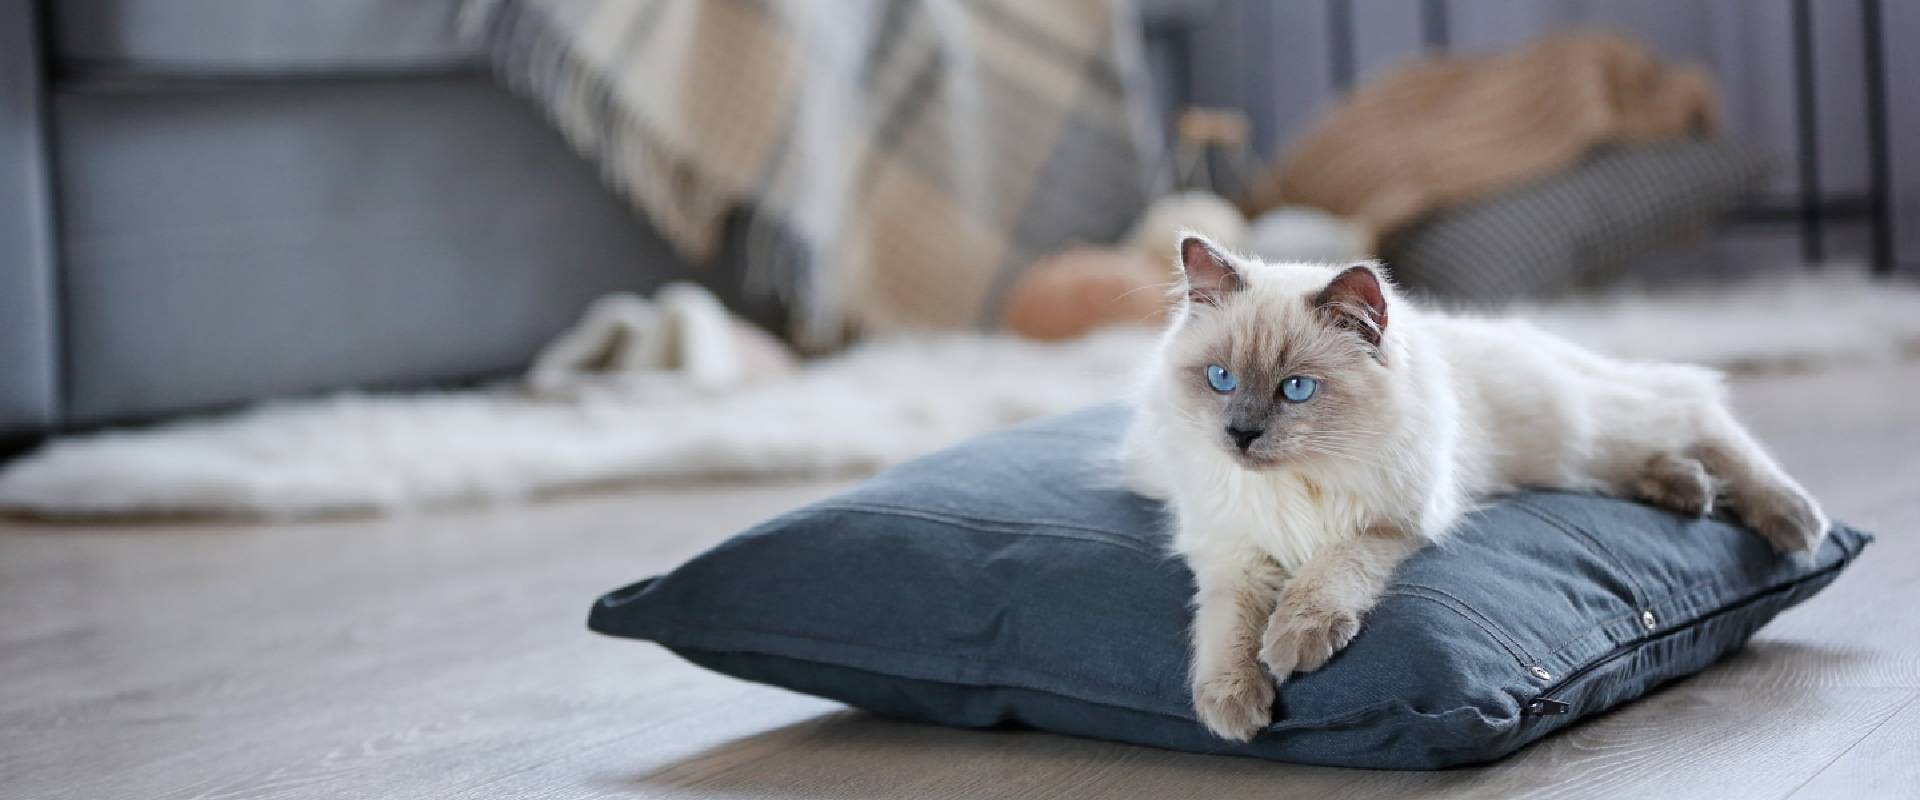 Blue-eyed cool cat laying on a cushion